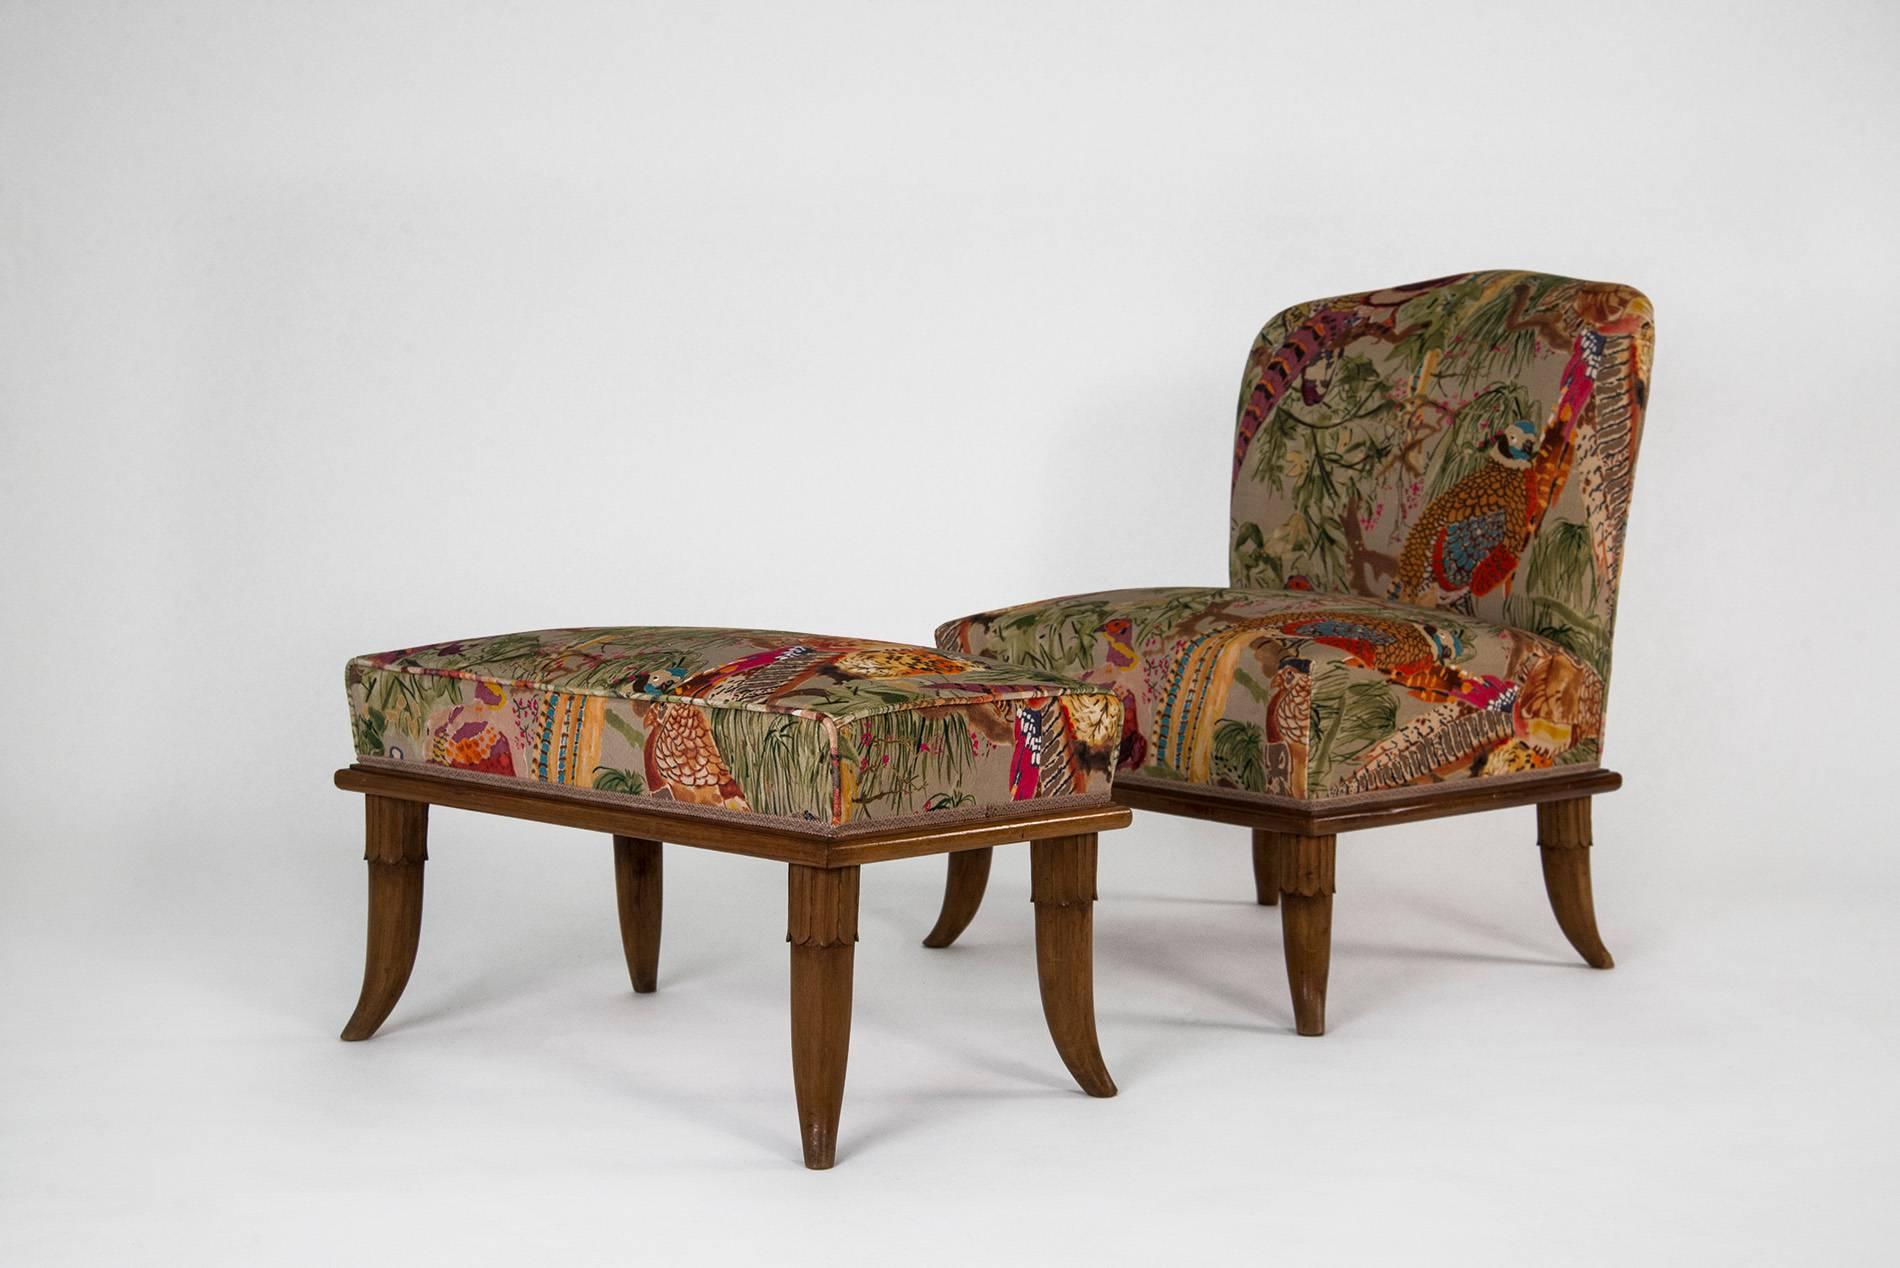 Pair of extraordinary lounge chairs with ottoman designed by Paolo Buffa, manufactured in Italy in the 1940s. Wooden structure, upholstery covered with an exceptional velvet with tropical patterns. Completely restored.